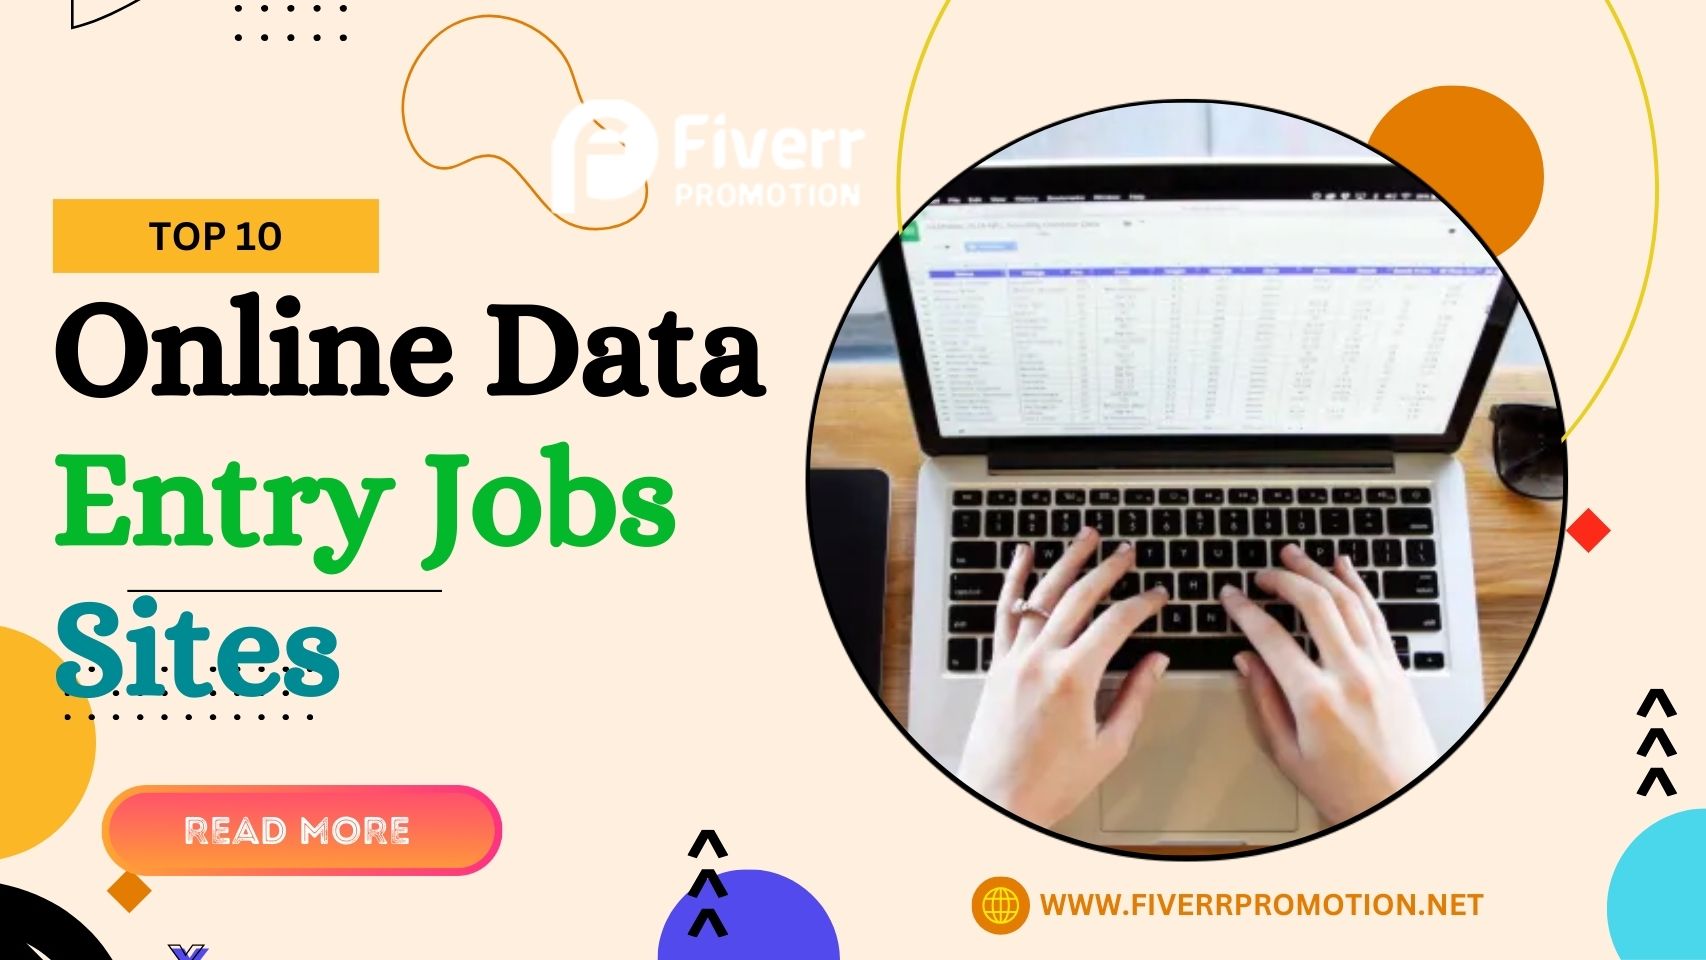 Top 10 online data entry jobs sites